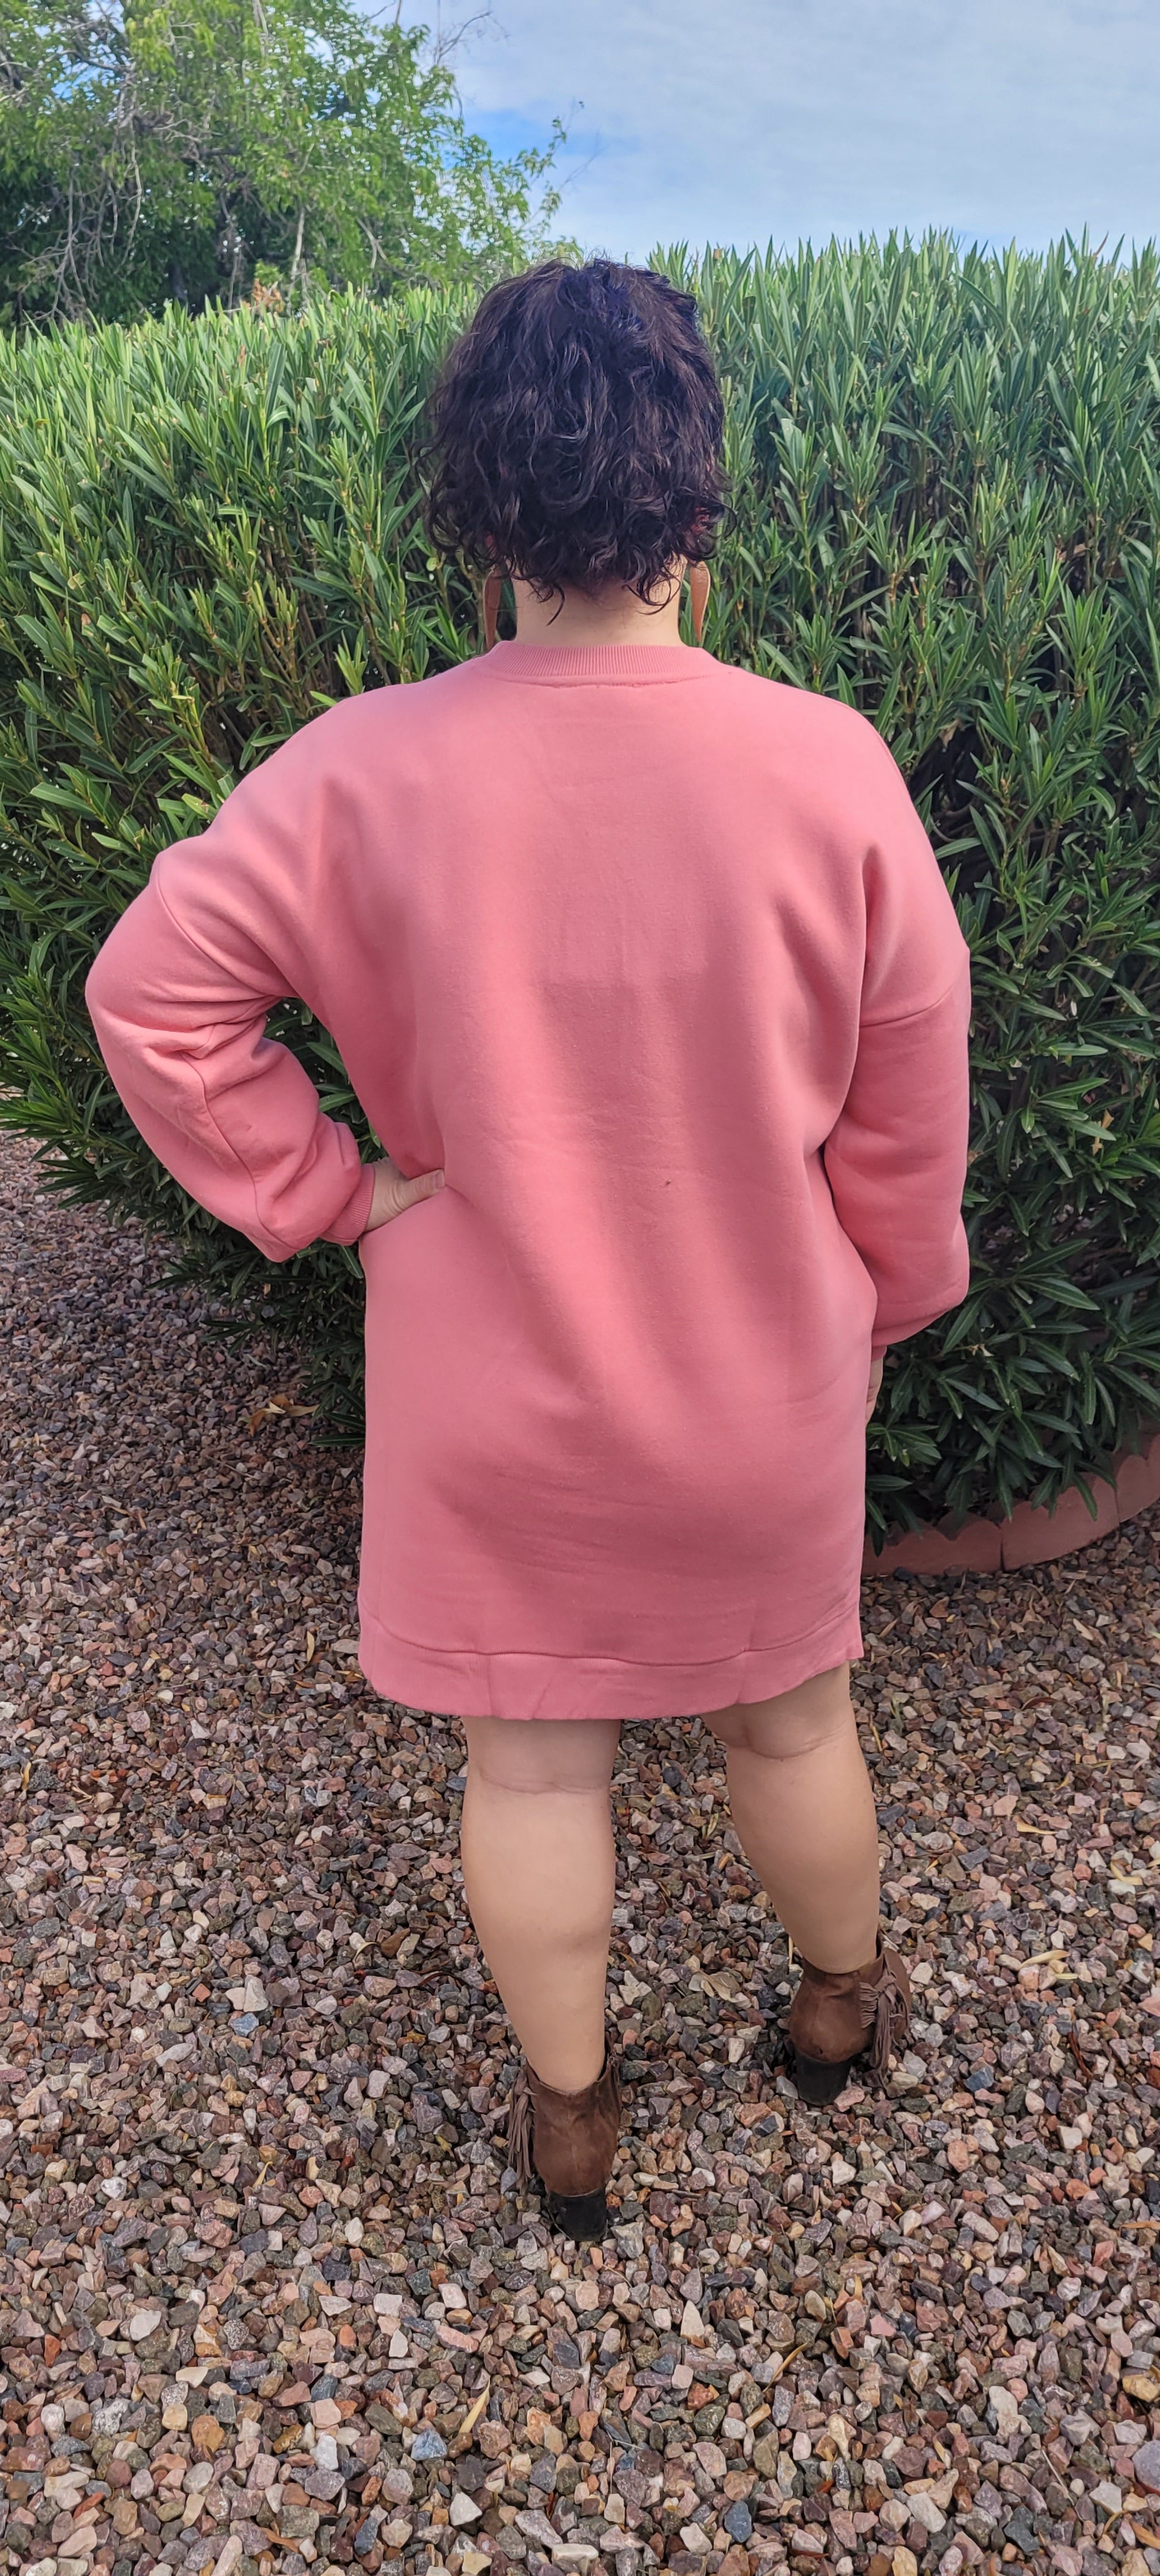 “Rock Candy” is a dusty rose sweatshirt that can be worn with leggings, jeans, or as a dress. This sweatshirt features a rounded ribbed neckline, ribbed cuffed sleeves, and two functional side pockets. It is a relaxed fit with a high-low hem. This material is very soft. Sizes small through x-large.